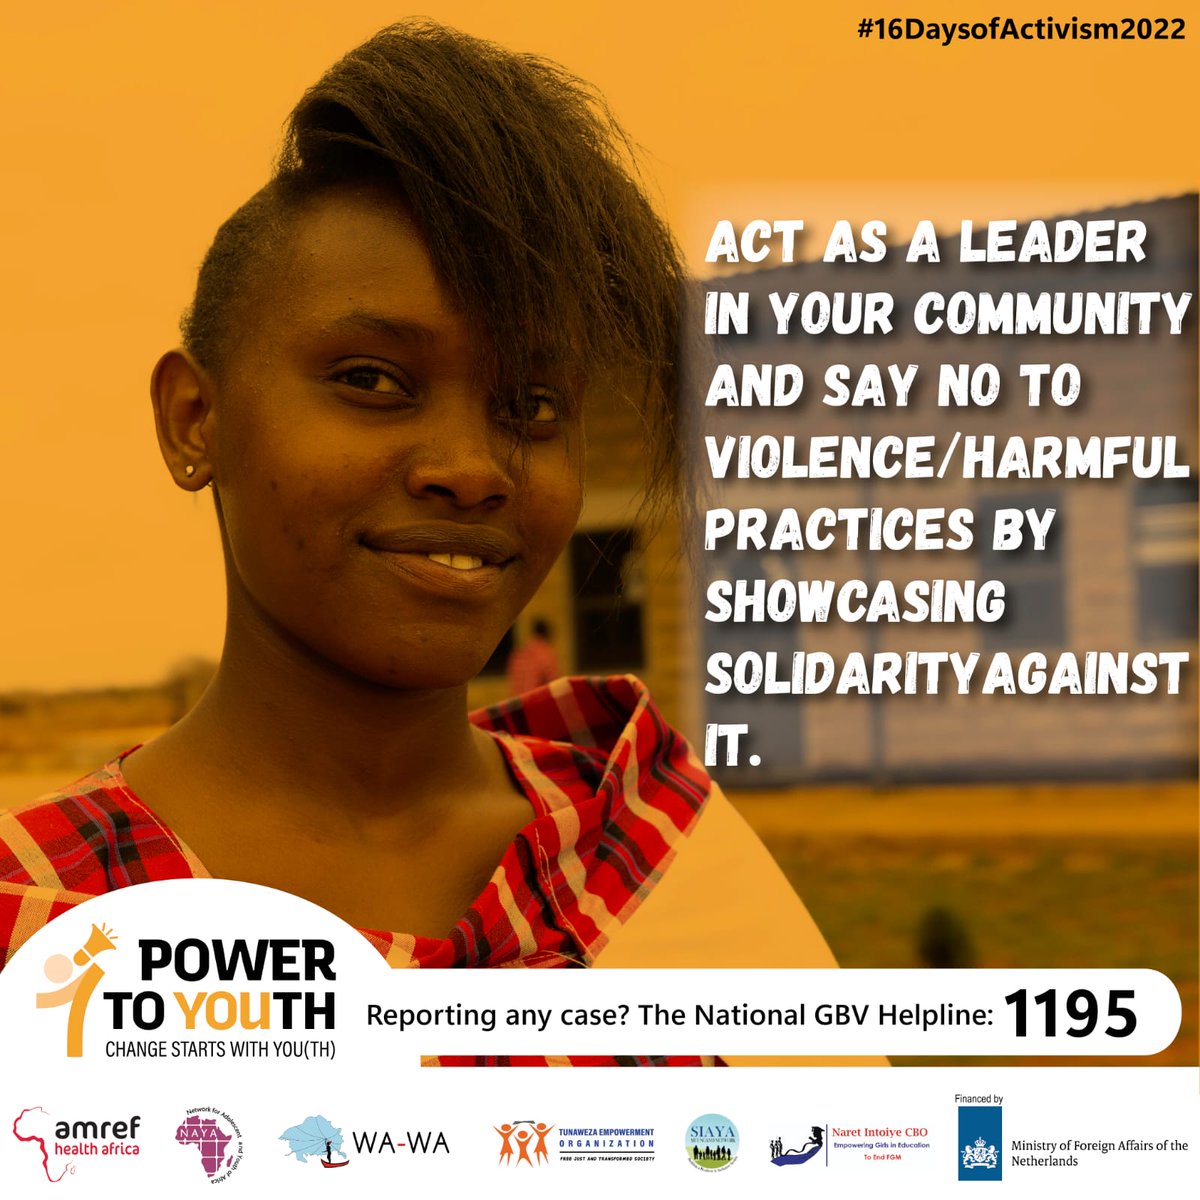 #Power2Youth will continuously increase its efforts to prevent Female Genital Mutilation, and advance gender equality and human rights, including the right to sexual and reproductive health. Say NO to FGM! #16DaysofActivism2022
@powertoyouth21  
@TunawezaEmpower  
@Amref_Kenya